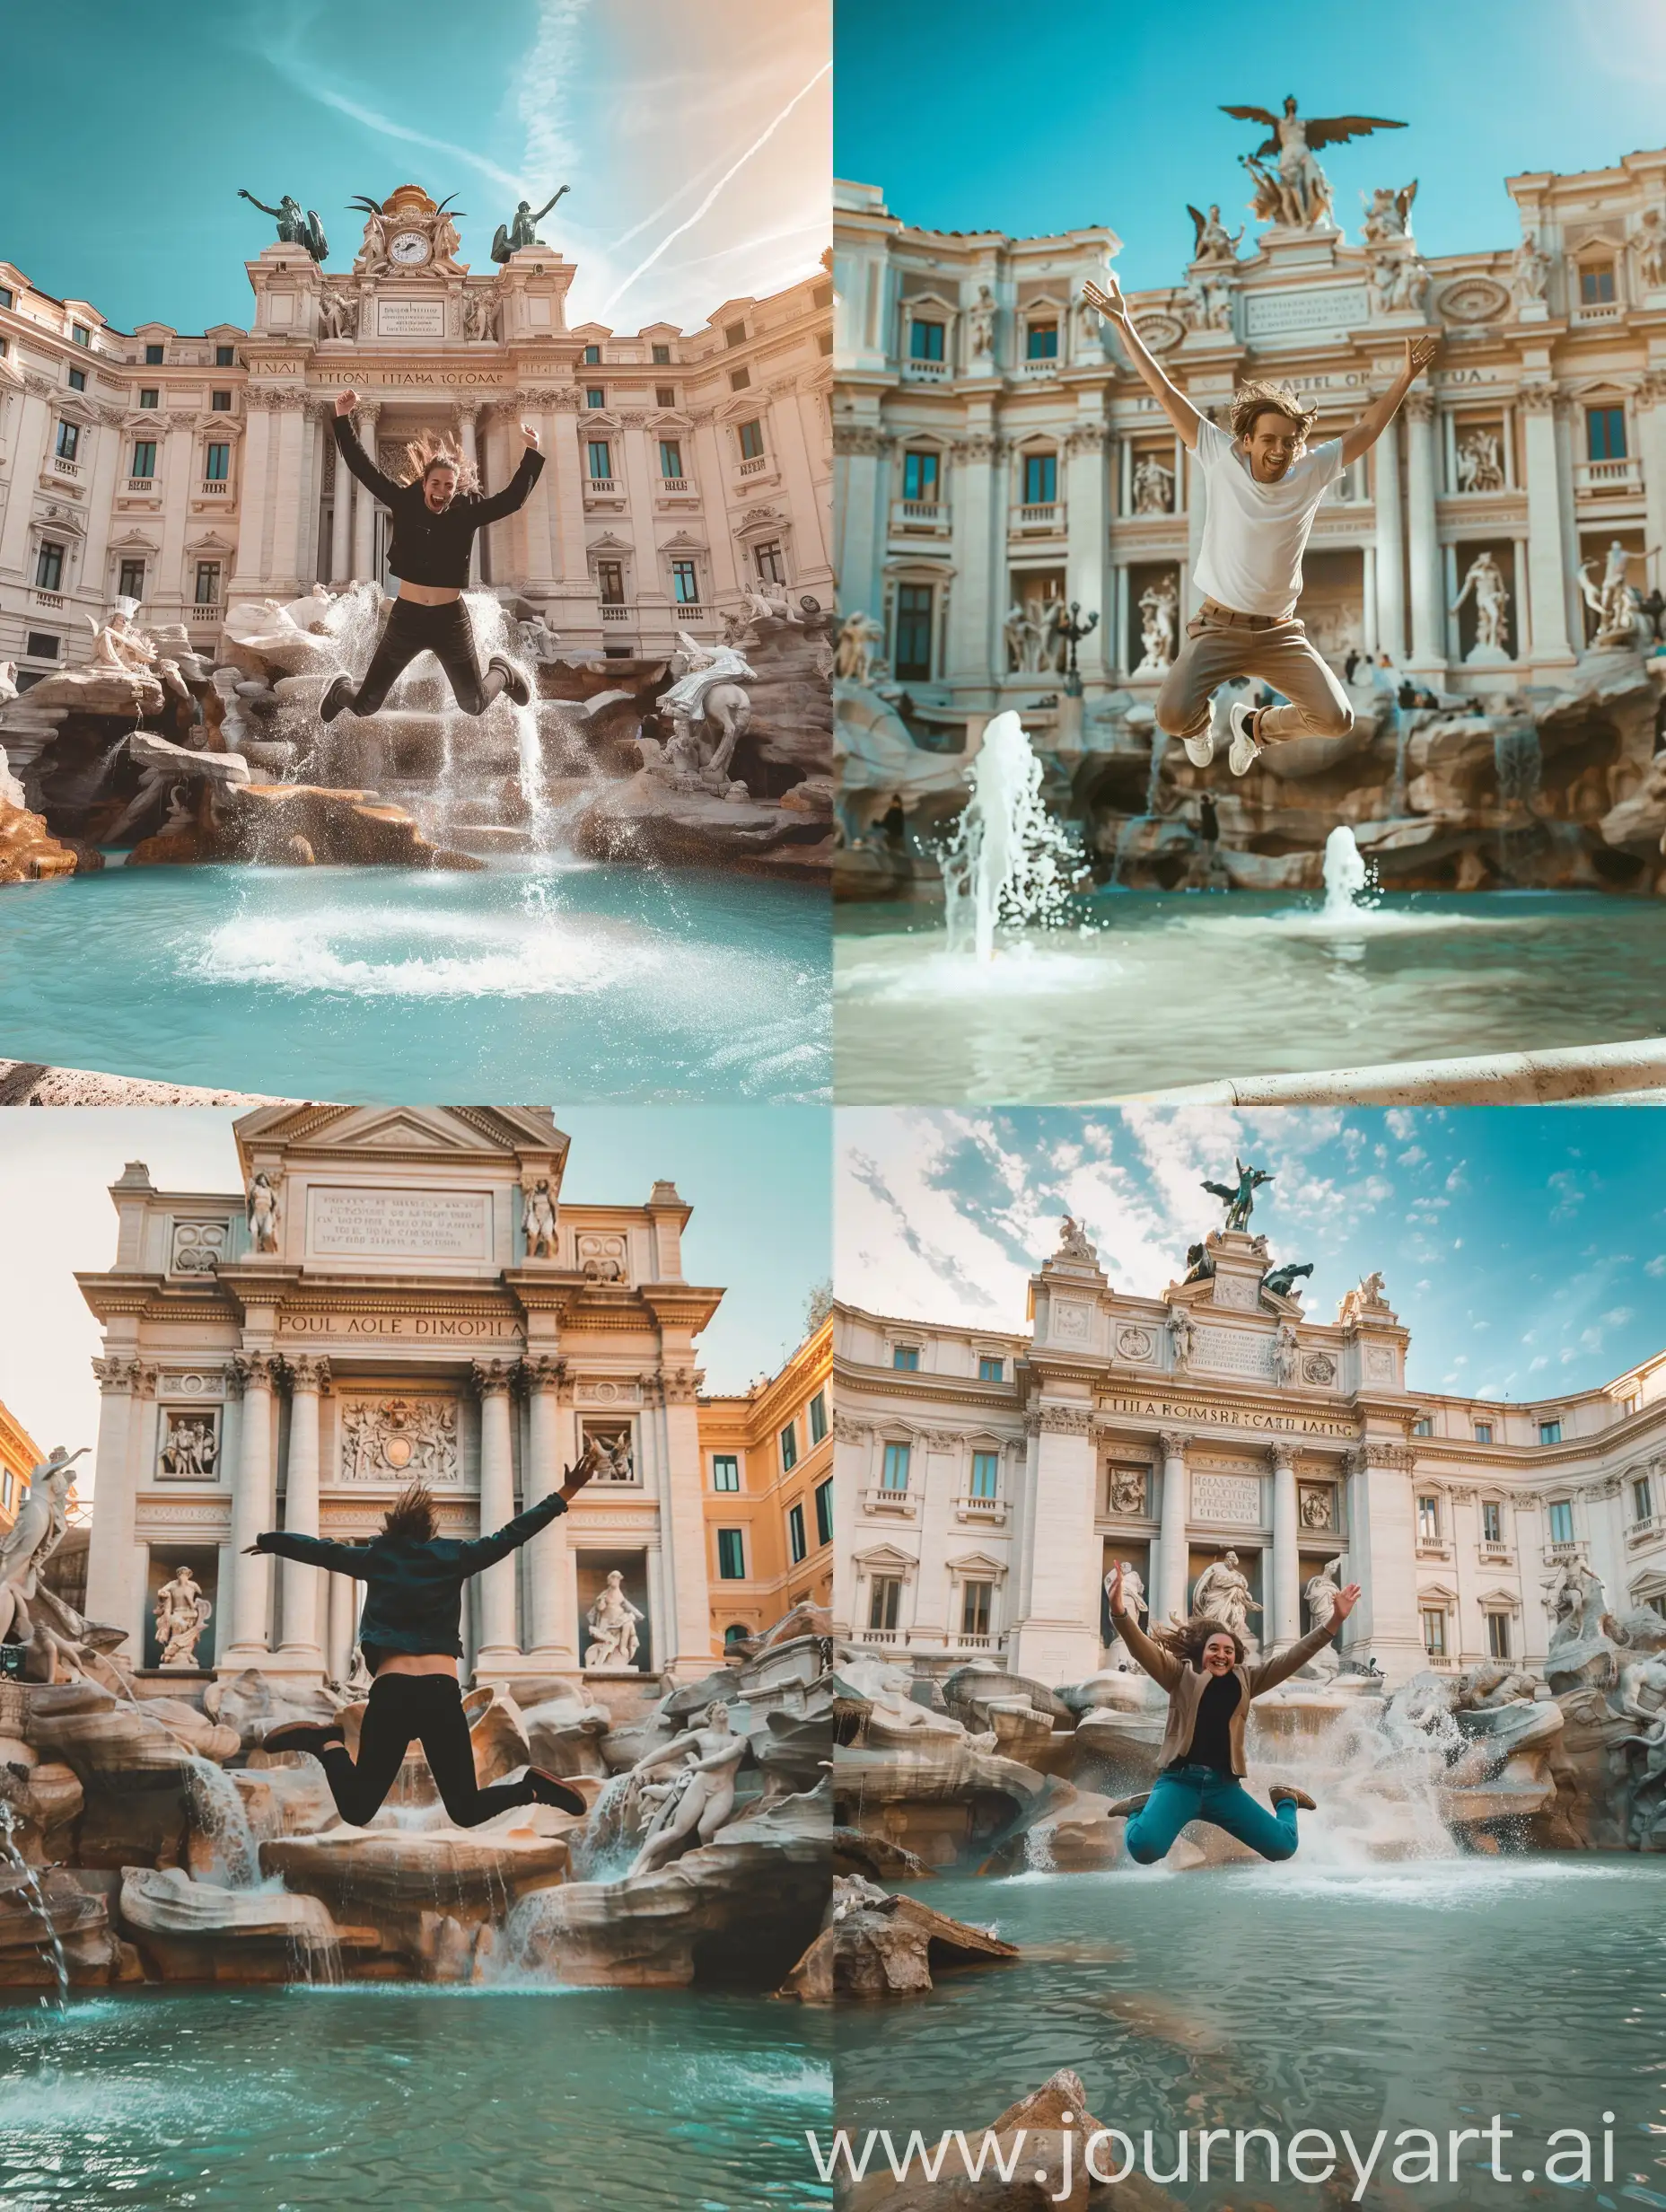 A happy person jumping in the Trevi Fountain in Italy